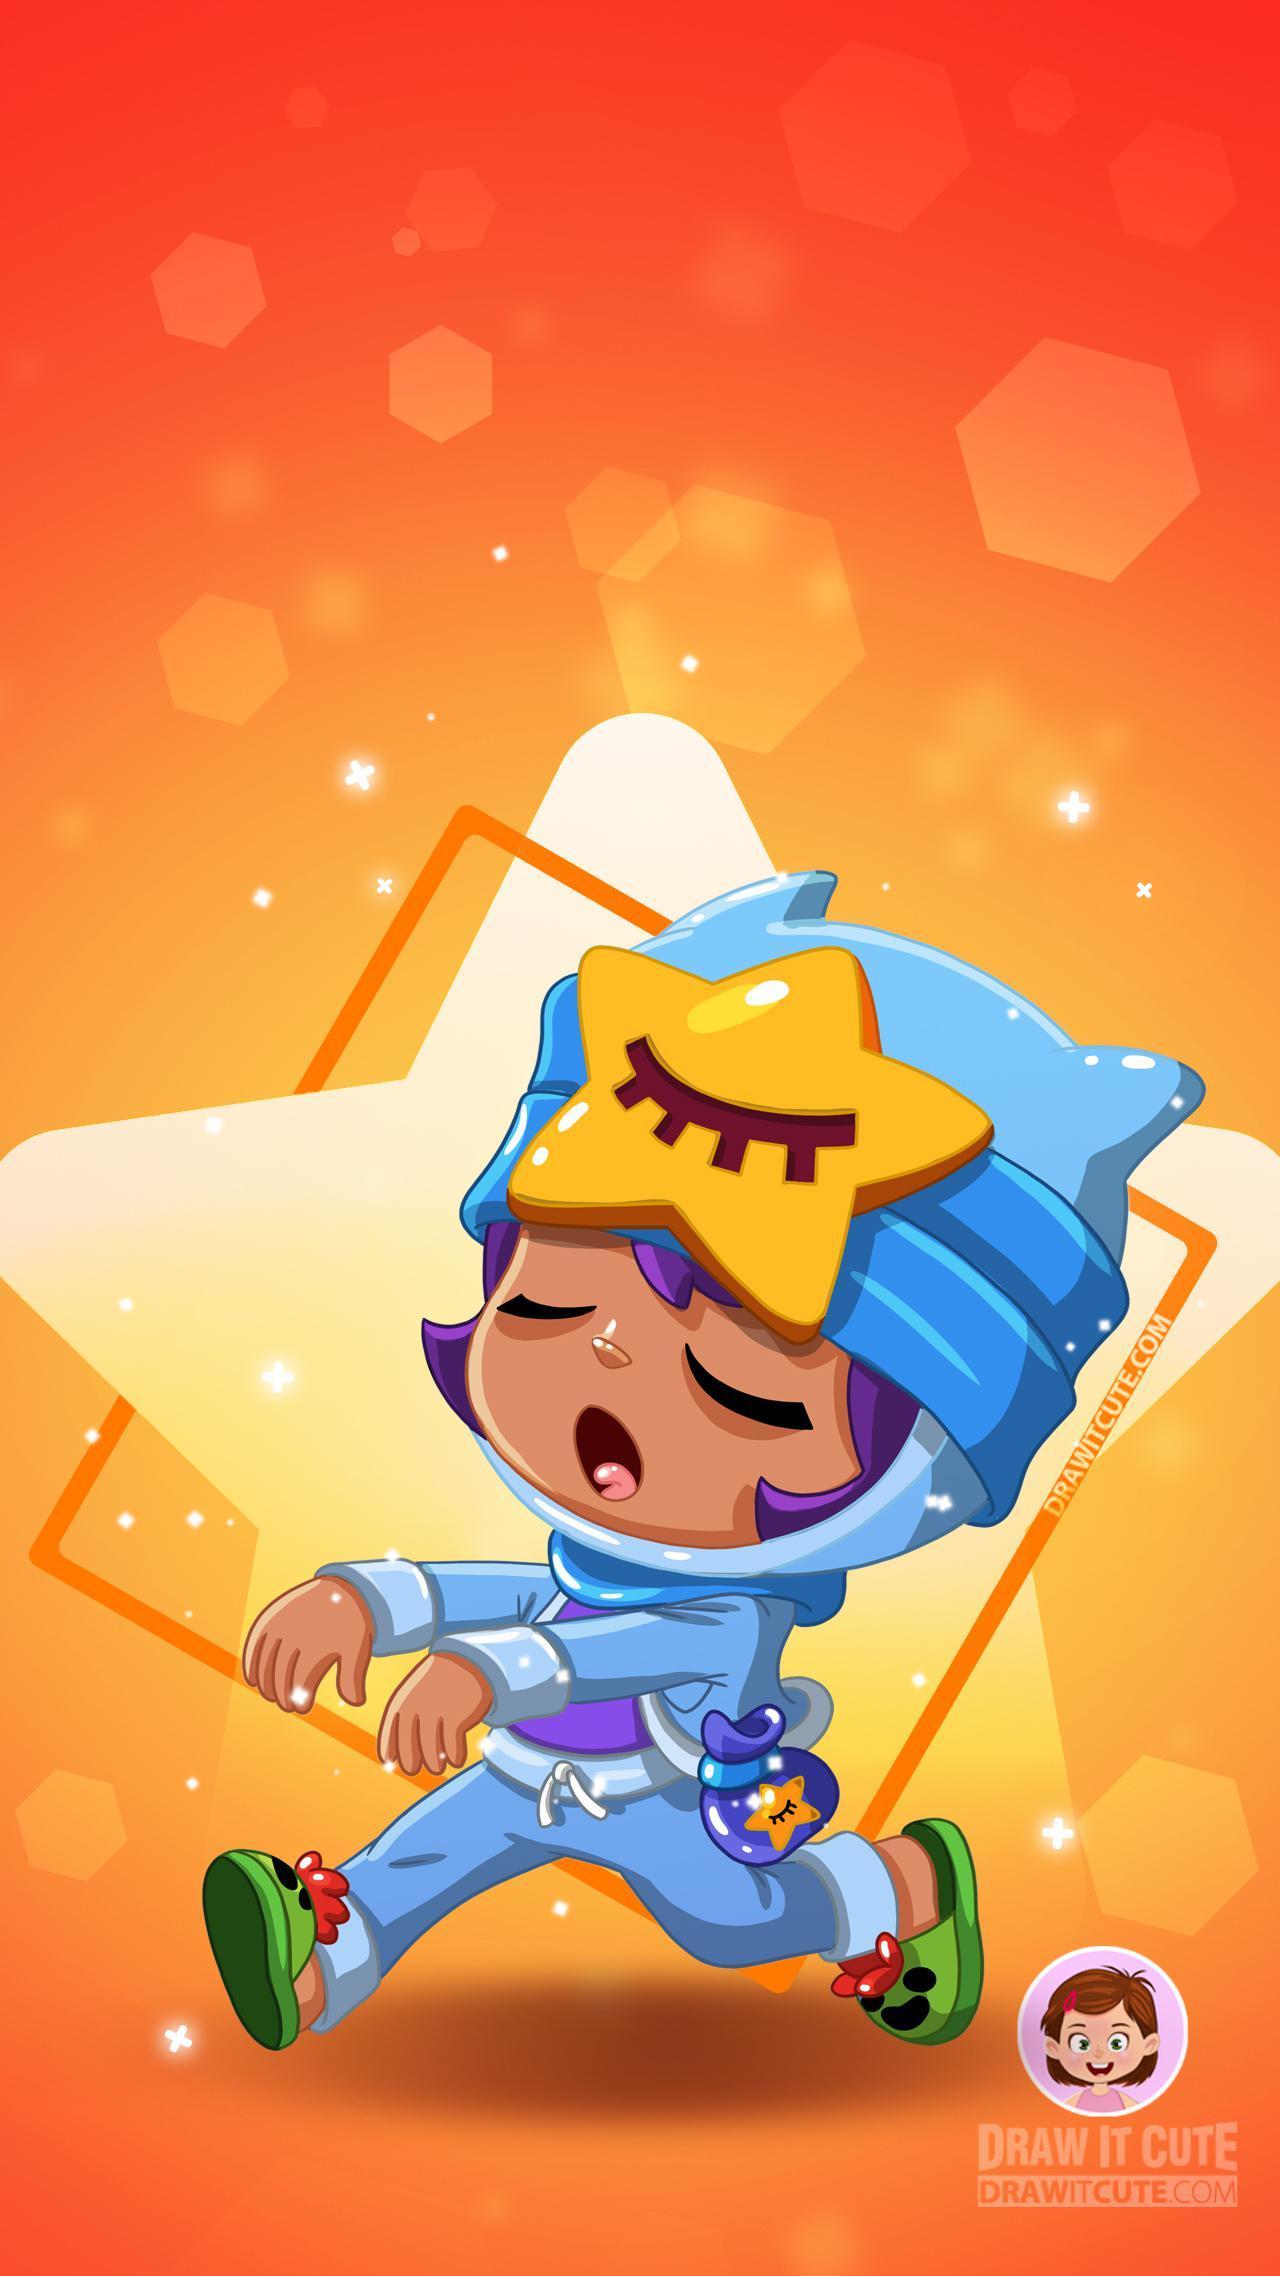 Sandy Brawl Stars Wallpapers Top Free Sandy Brawl Stars Backgrounds Wallpaperaccess - brawl stars background images 2021